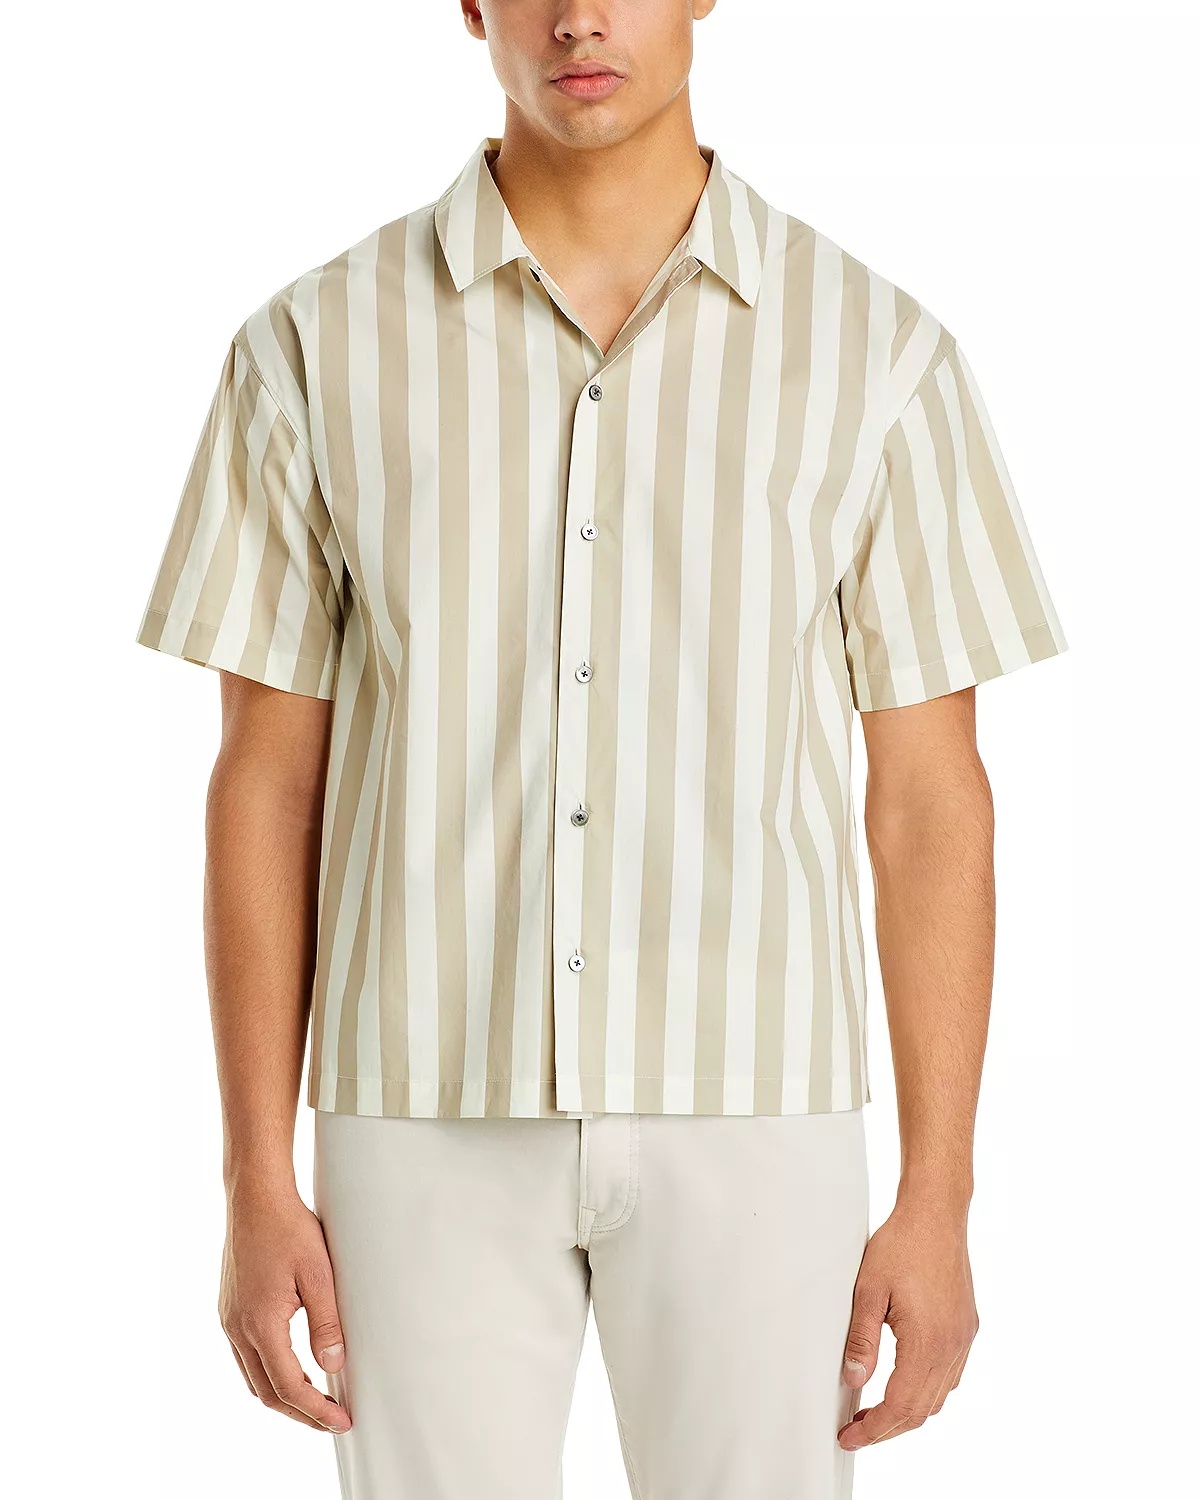 Printed Button Front Short Sleeve Camp Shirt - 3